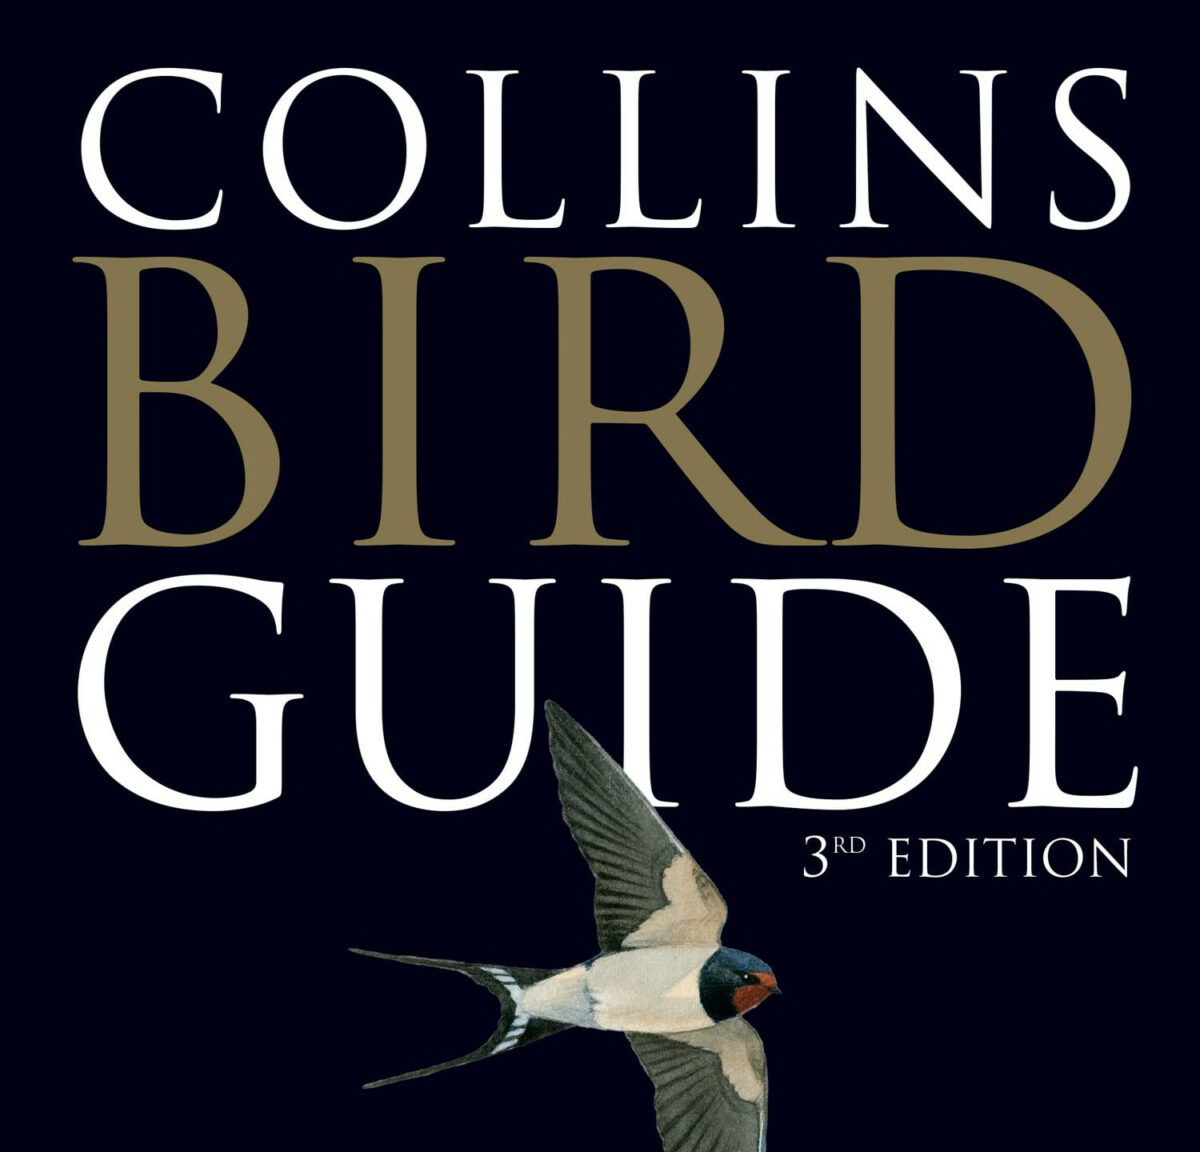 A Short History of the Collins Bird Guide